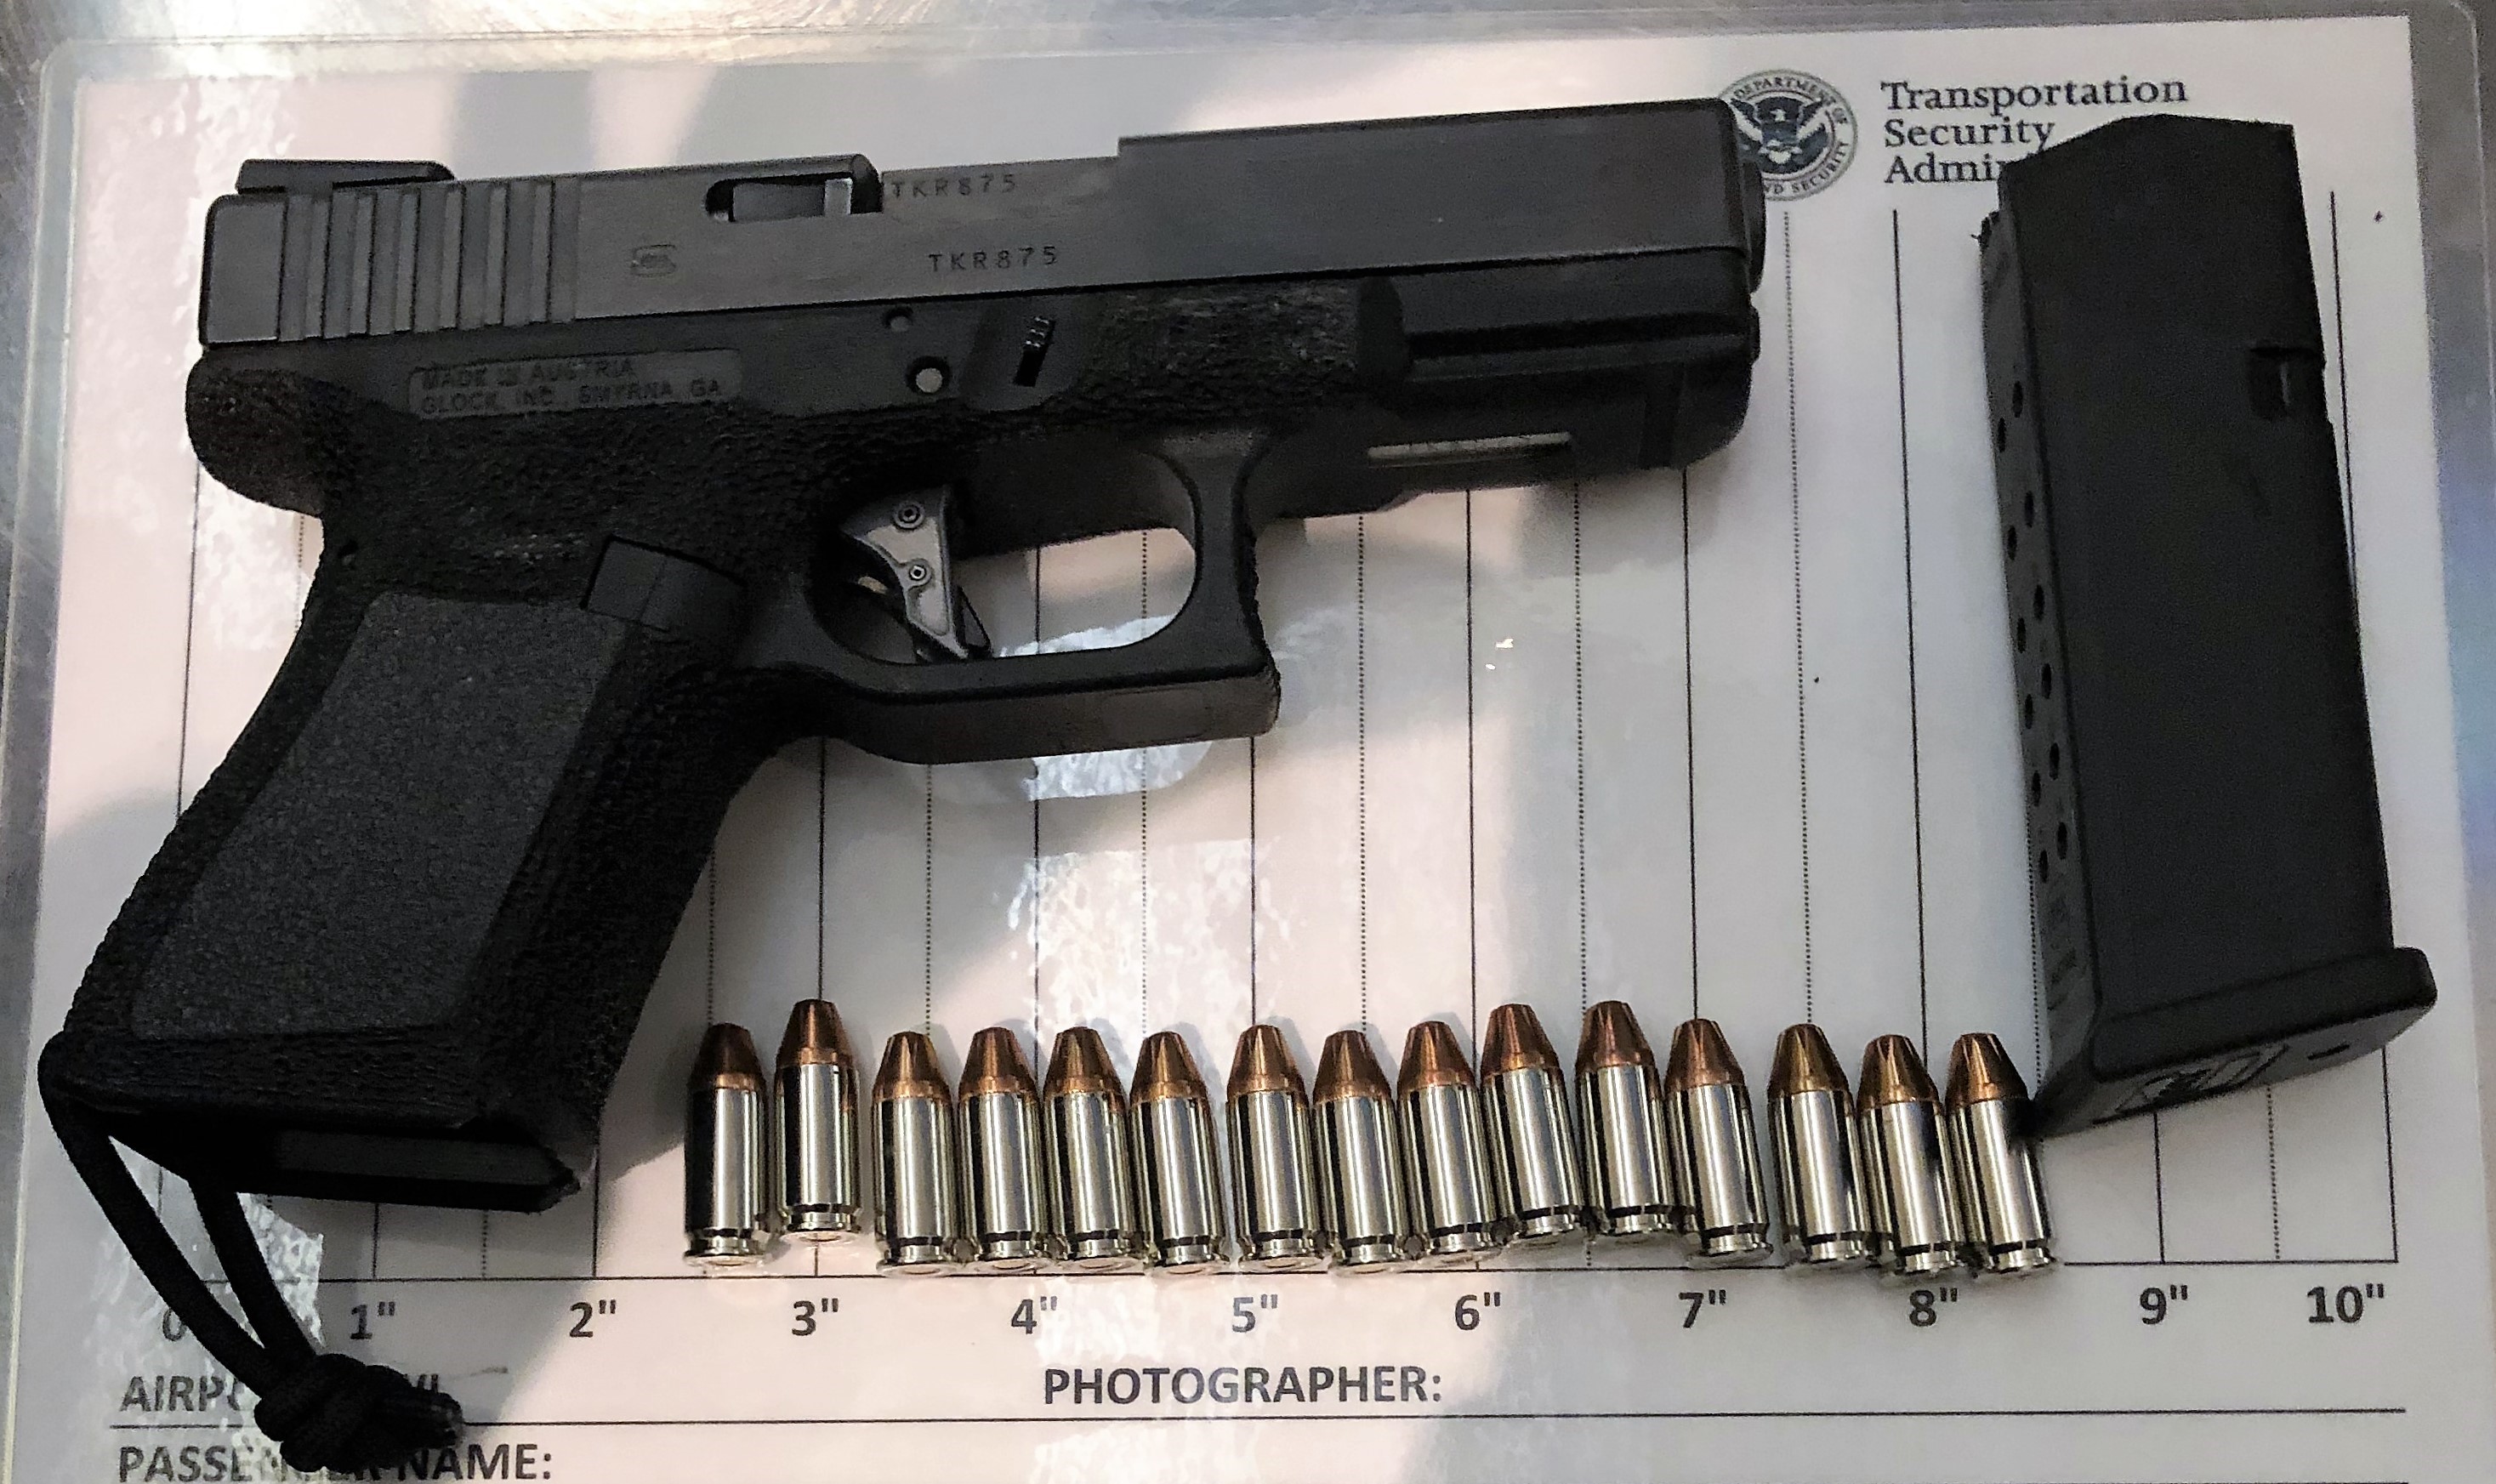 Tsa Officers At Bwi Airport Catch 26th Gun Of The Year In A Carry On Bag Gun Ties Record Set Two Years Ago Transportation Security Administration